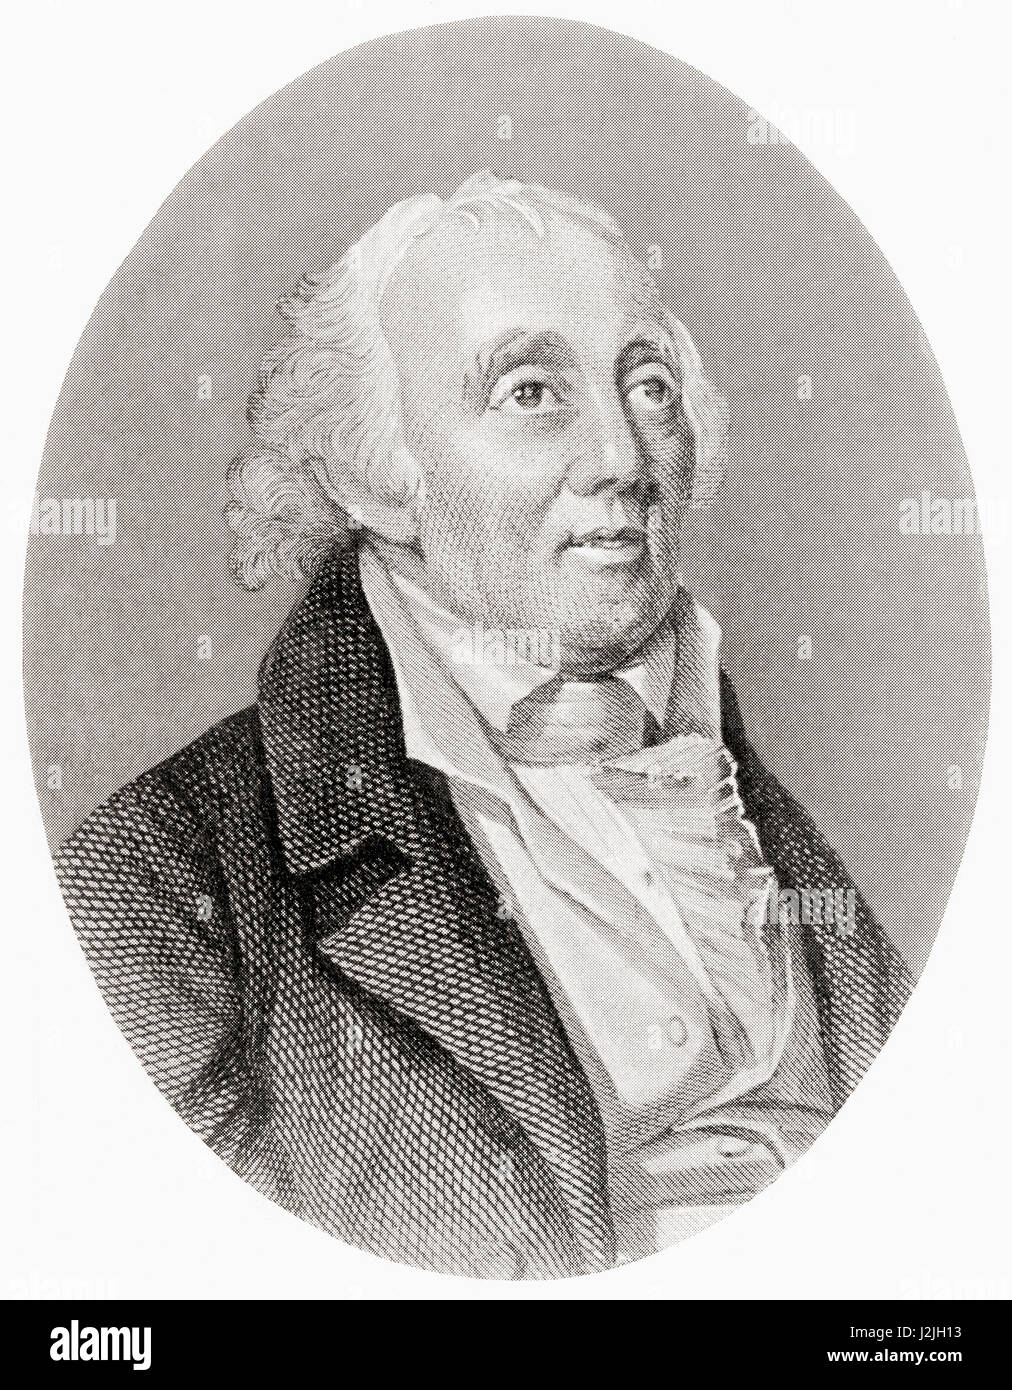 François Huber, 1750 – 1831.  Swiss naturalist.  From Hutchinson's History of the Nations, published 1915. Stock Photo